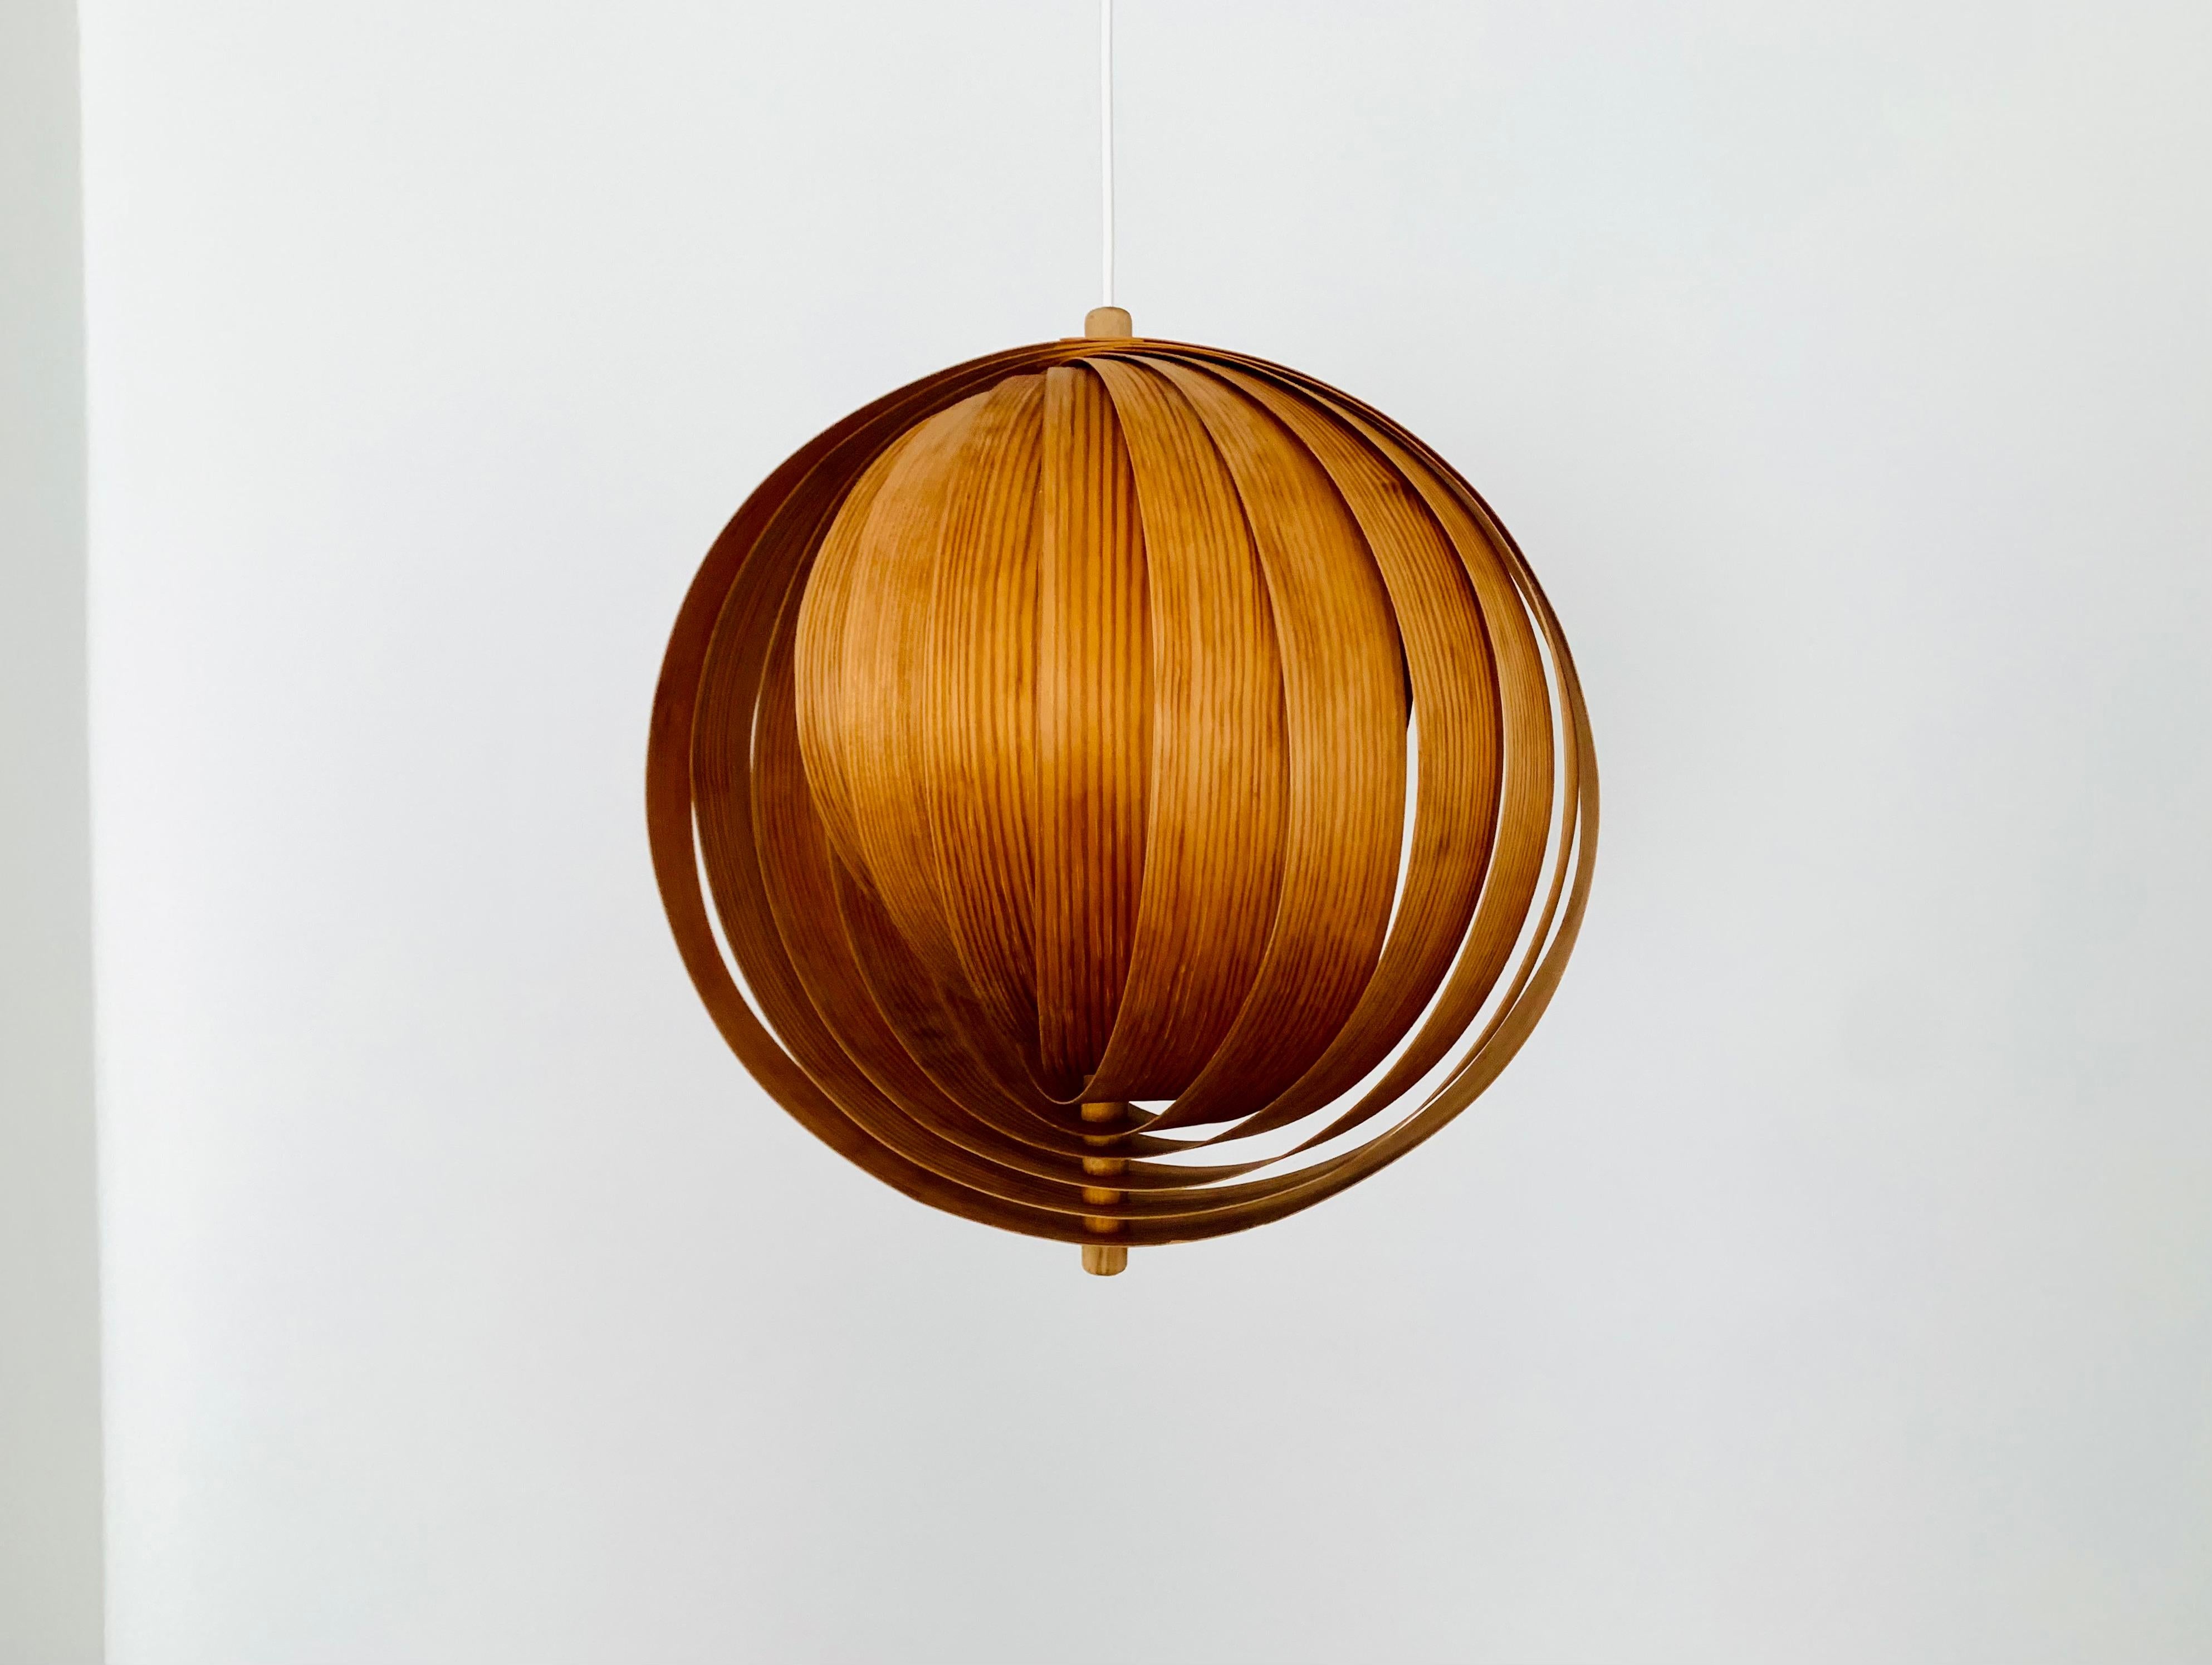 Extraordinarily beautiful wooden pendant lamp from the 1960s.
Loving and high-quality processing.
The design and the material create a very warm and pleasant light.

Condition:

Very good vintage condition with minimal signs of wear consistent